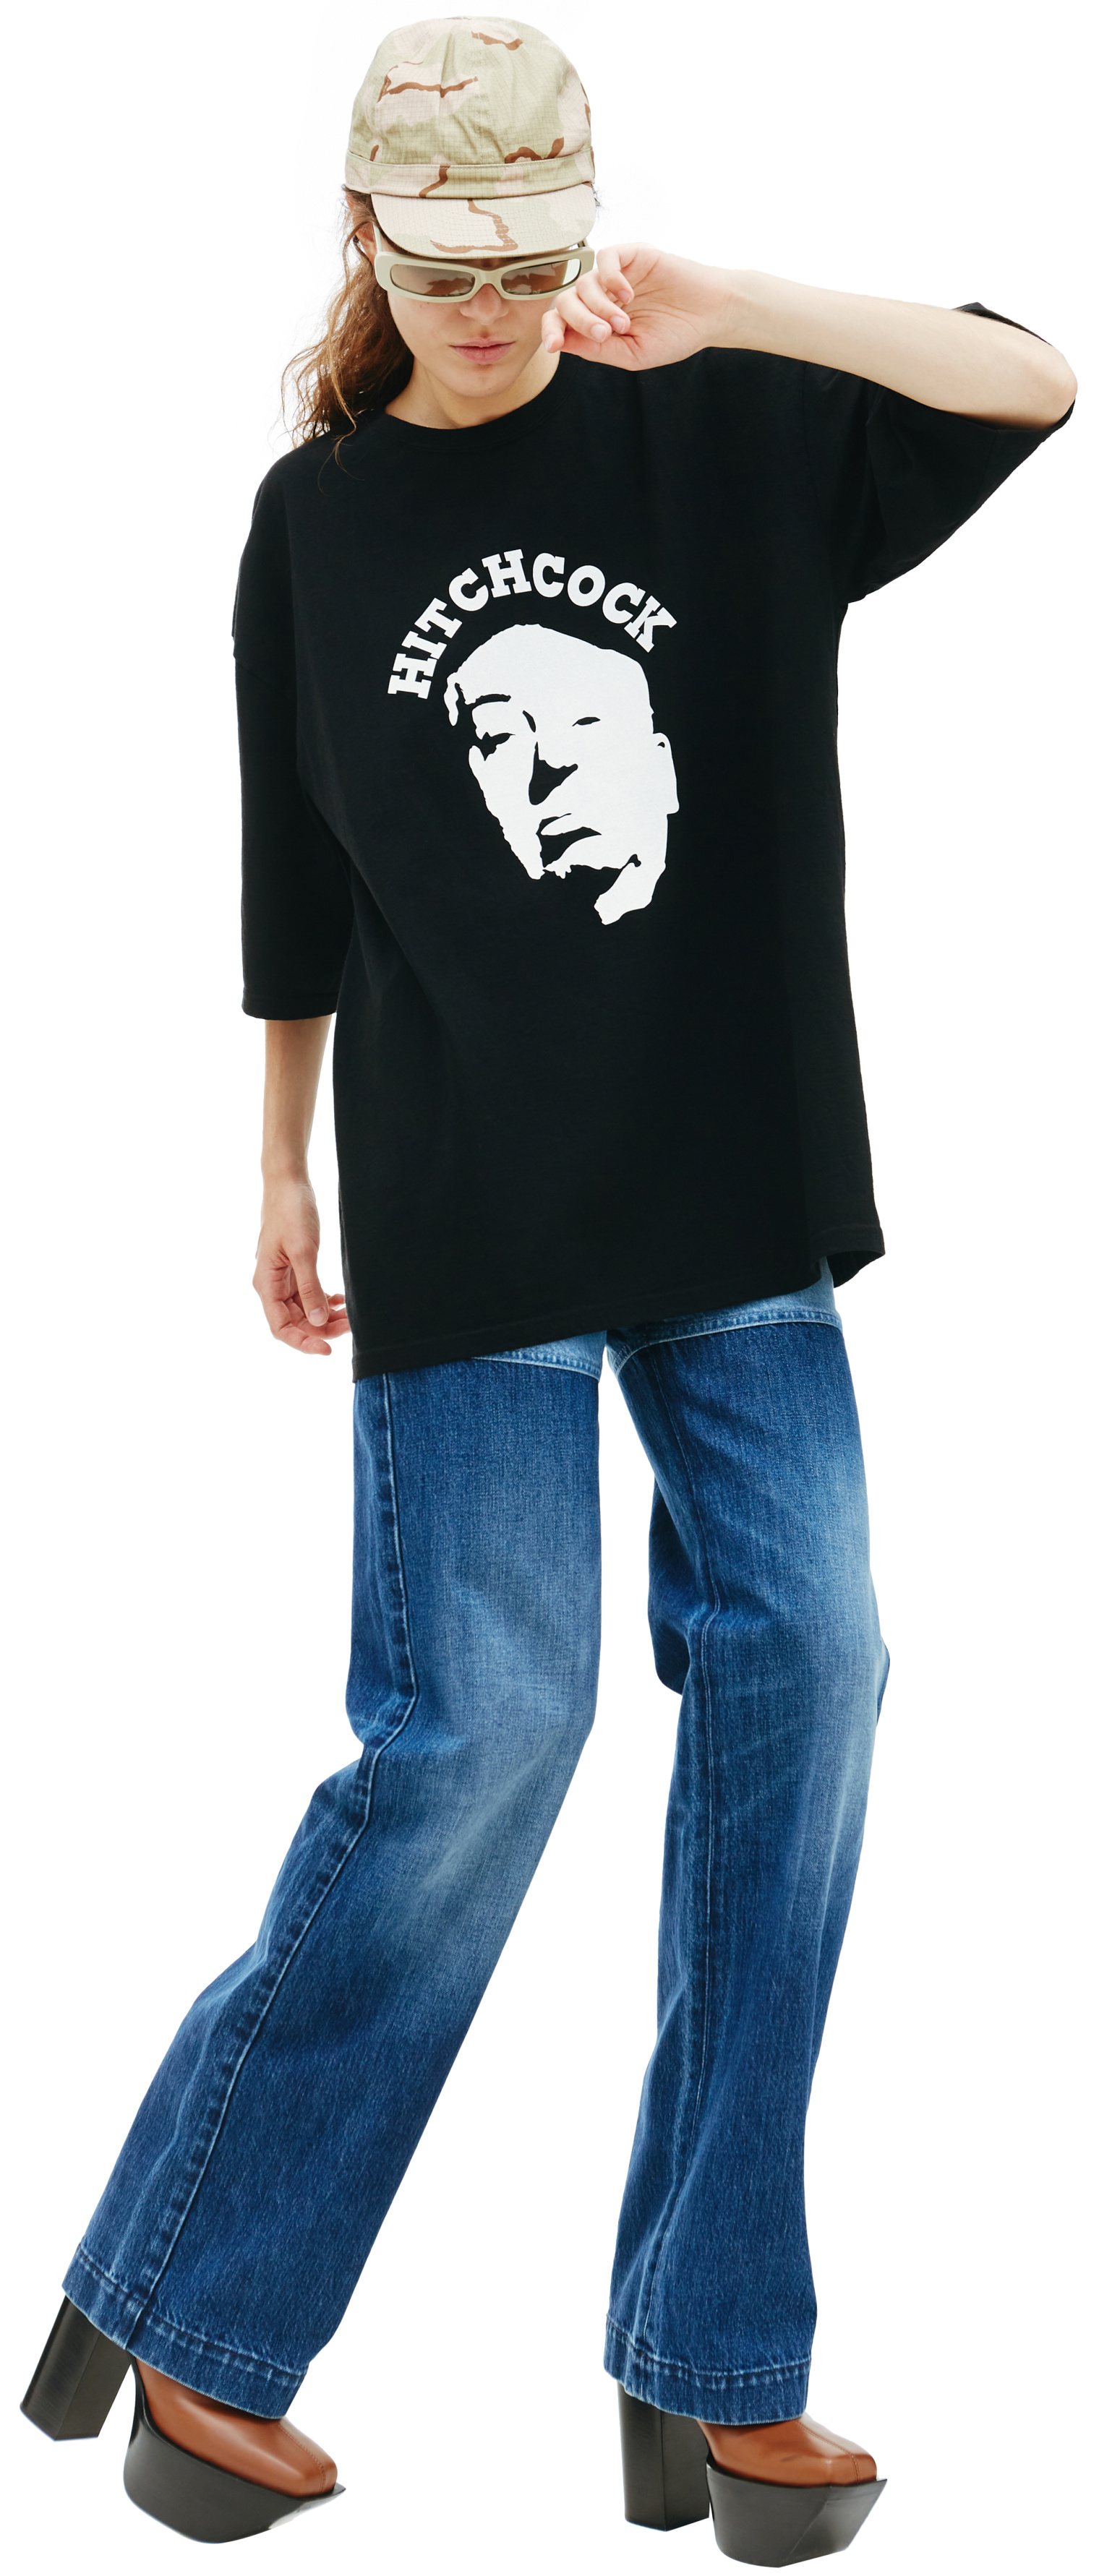 Undercover Hitchcock printed t-shirt